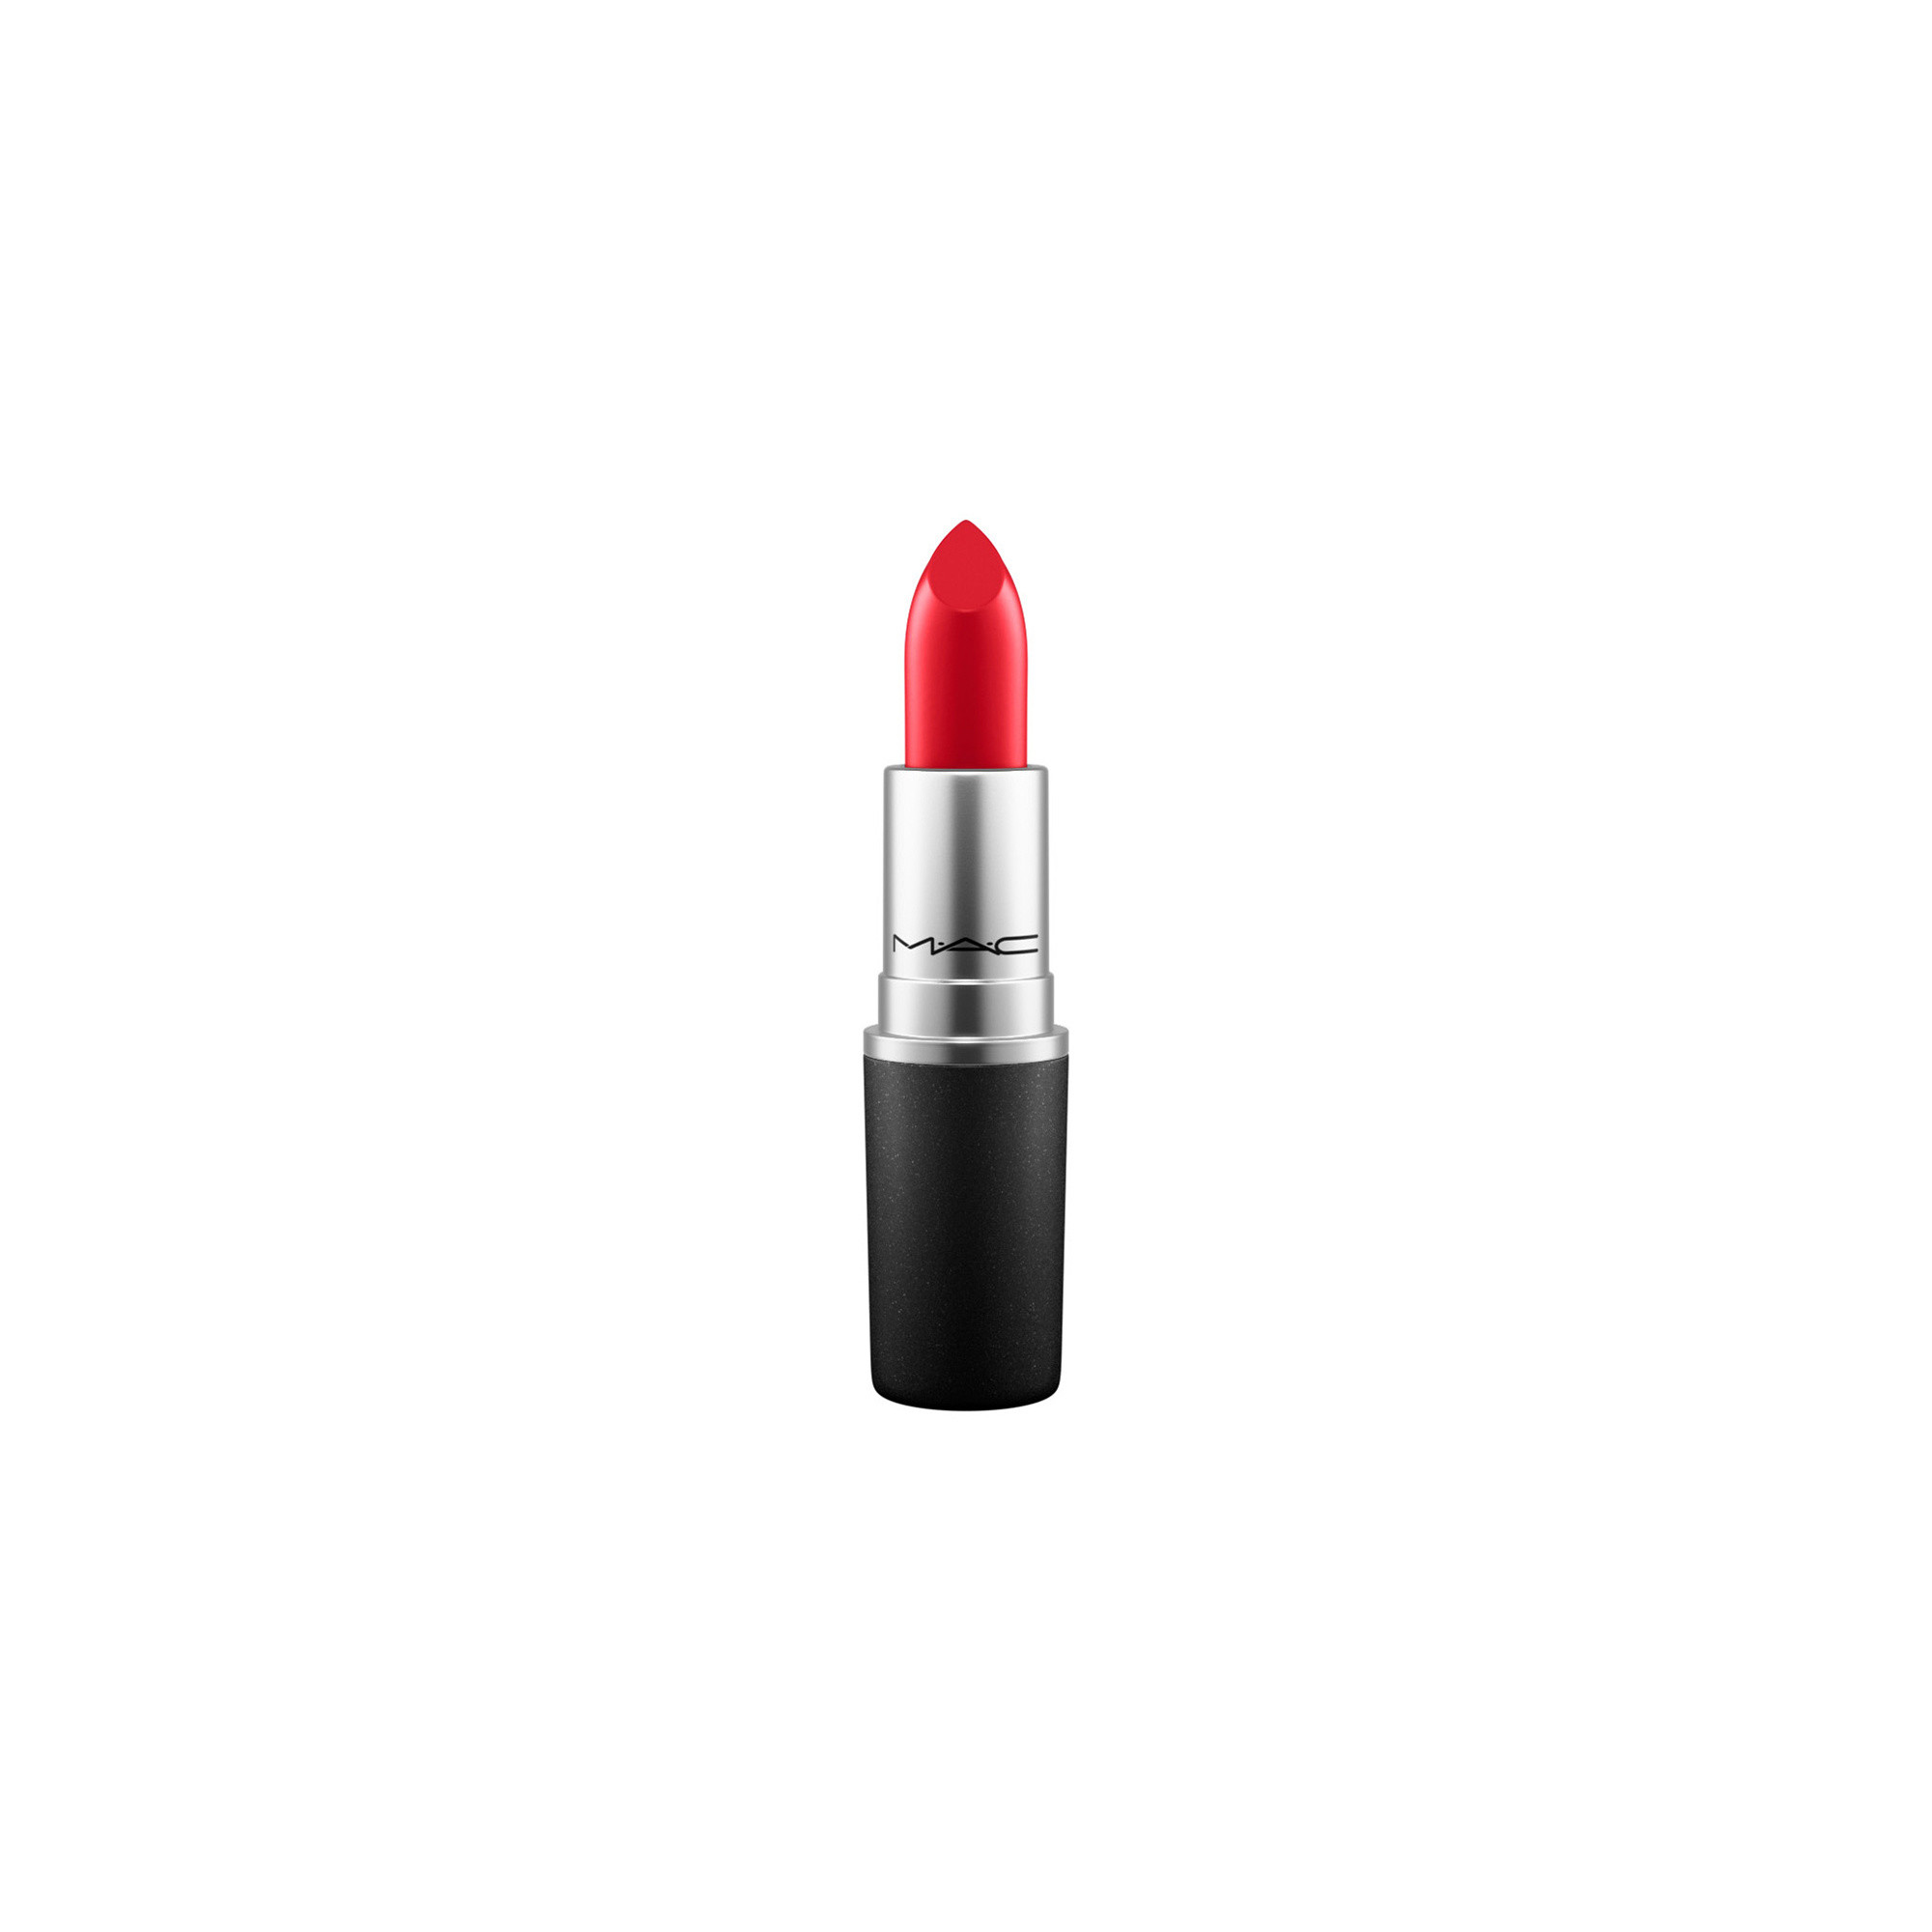 Satin Lipstick - Red, M·A·C RED, large image number 0